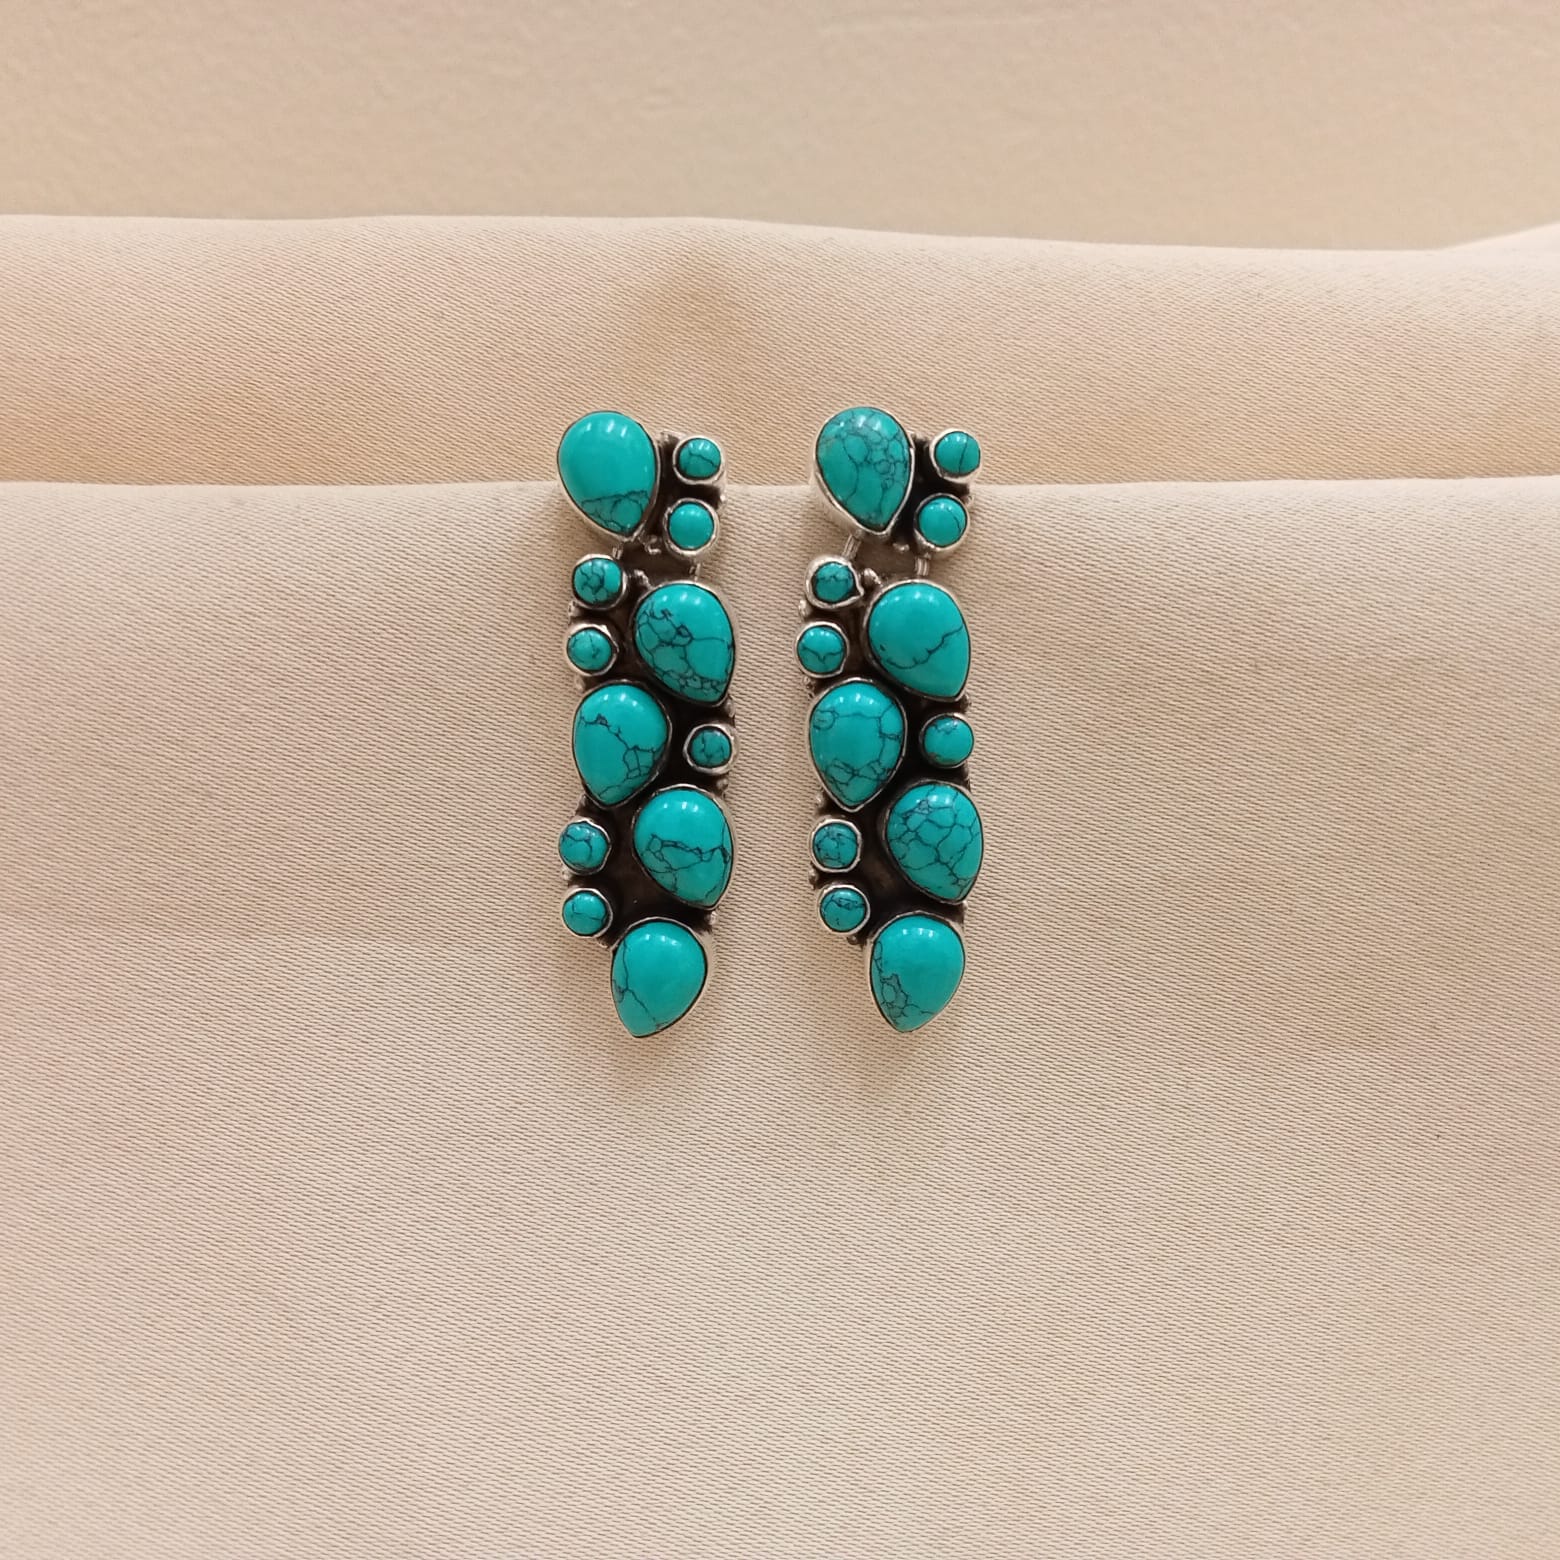 Abstract Hydro Turquoise Earrings